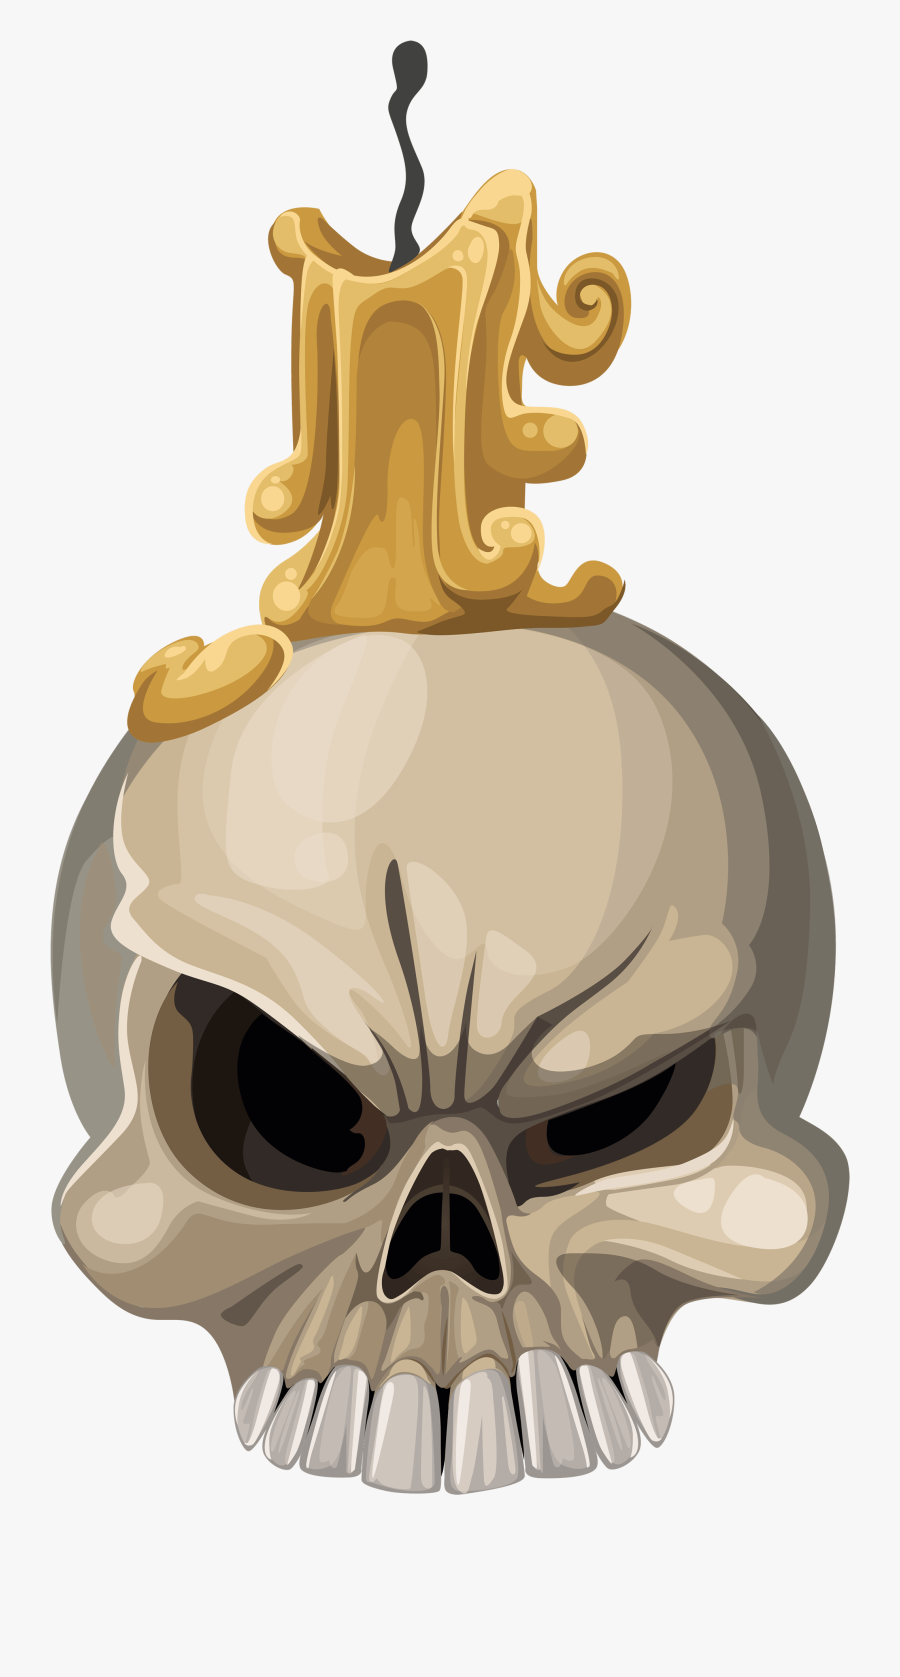 Halloween Skull With Candle Png Clipart Image - Halloween Candle Clipart, Transparent Clipart